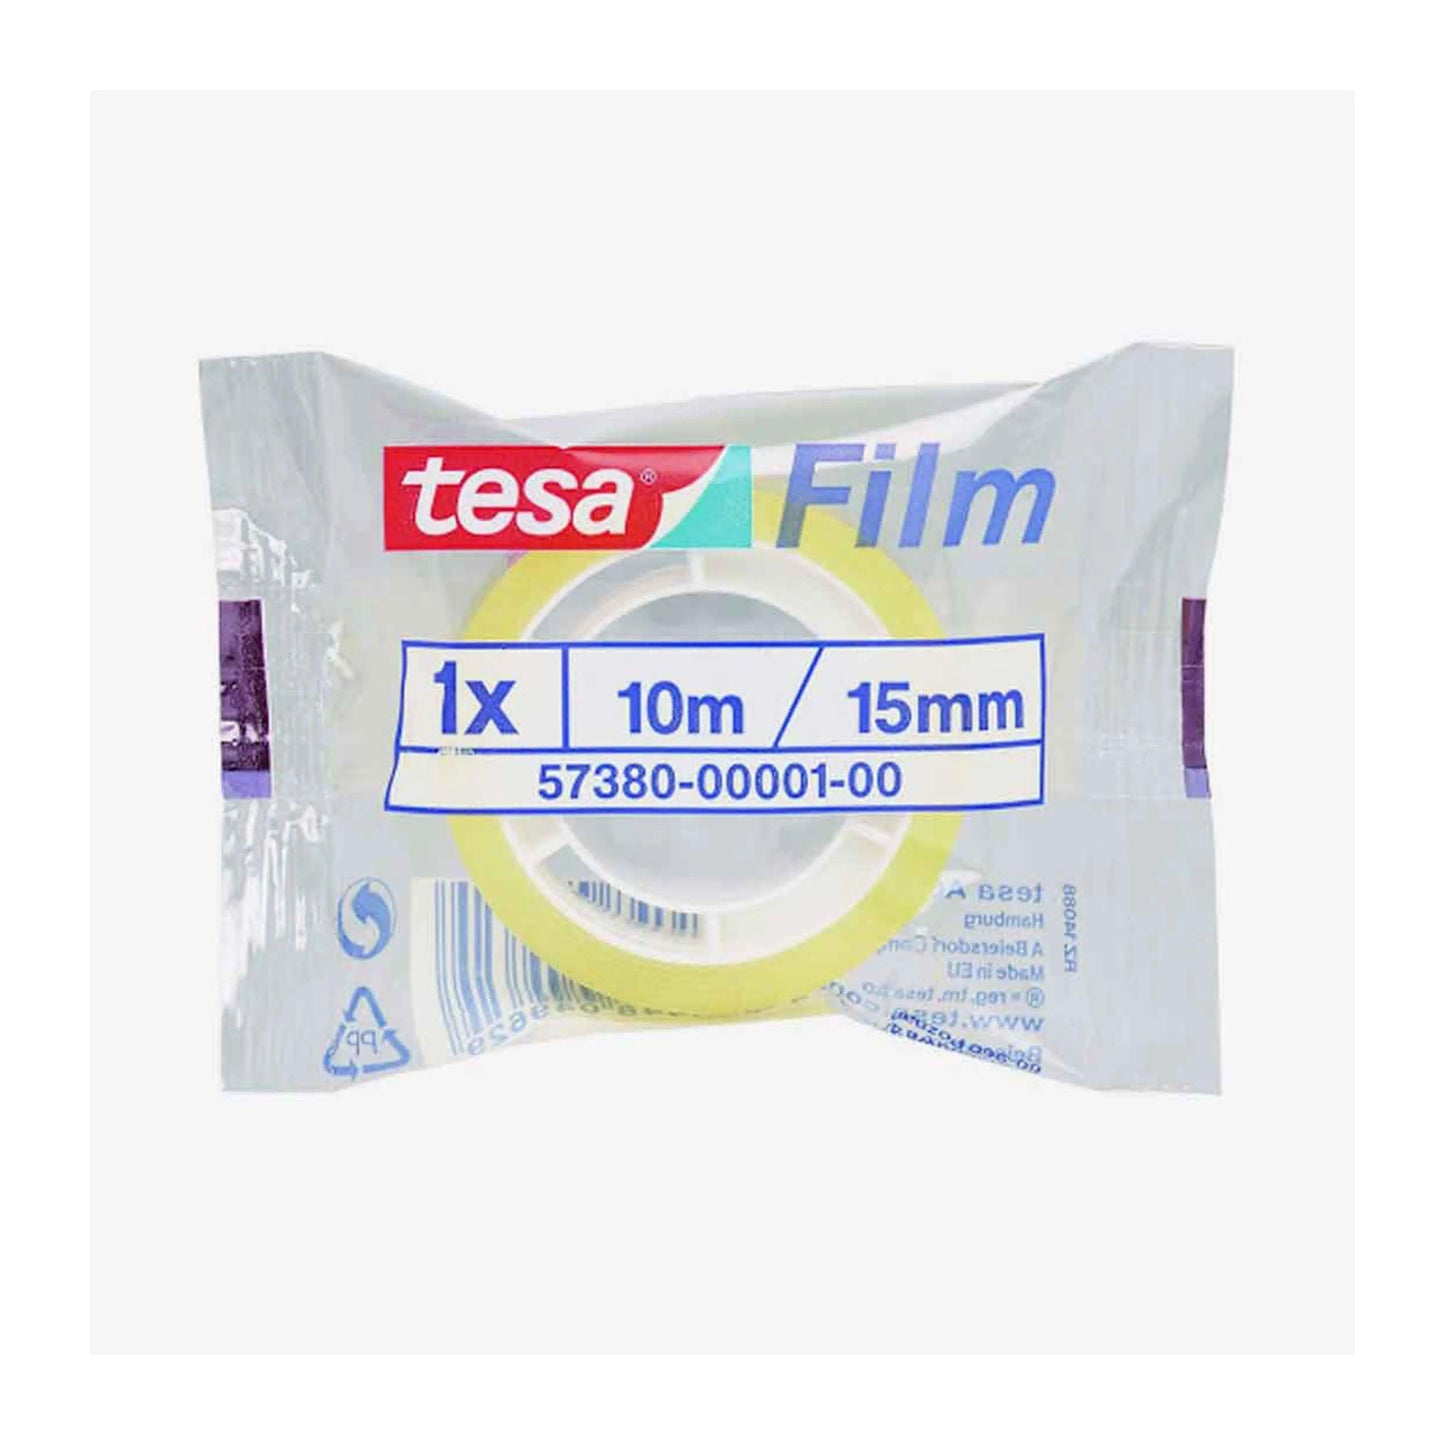 Tesa Film Size 15mm x 10 Meter Pack OF 10 The Stationers